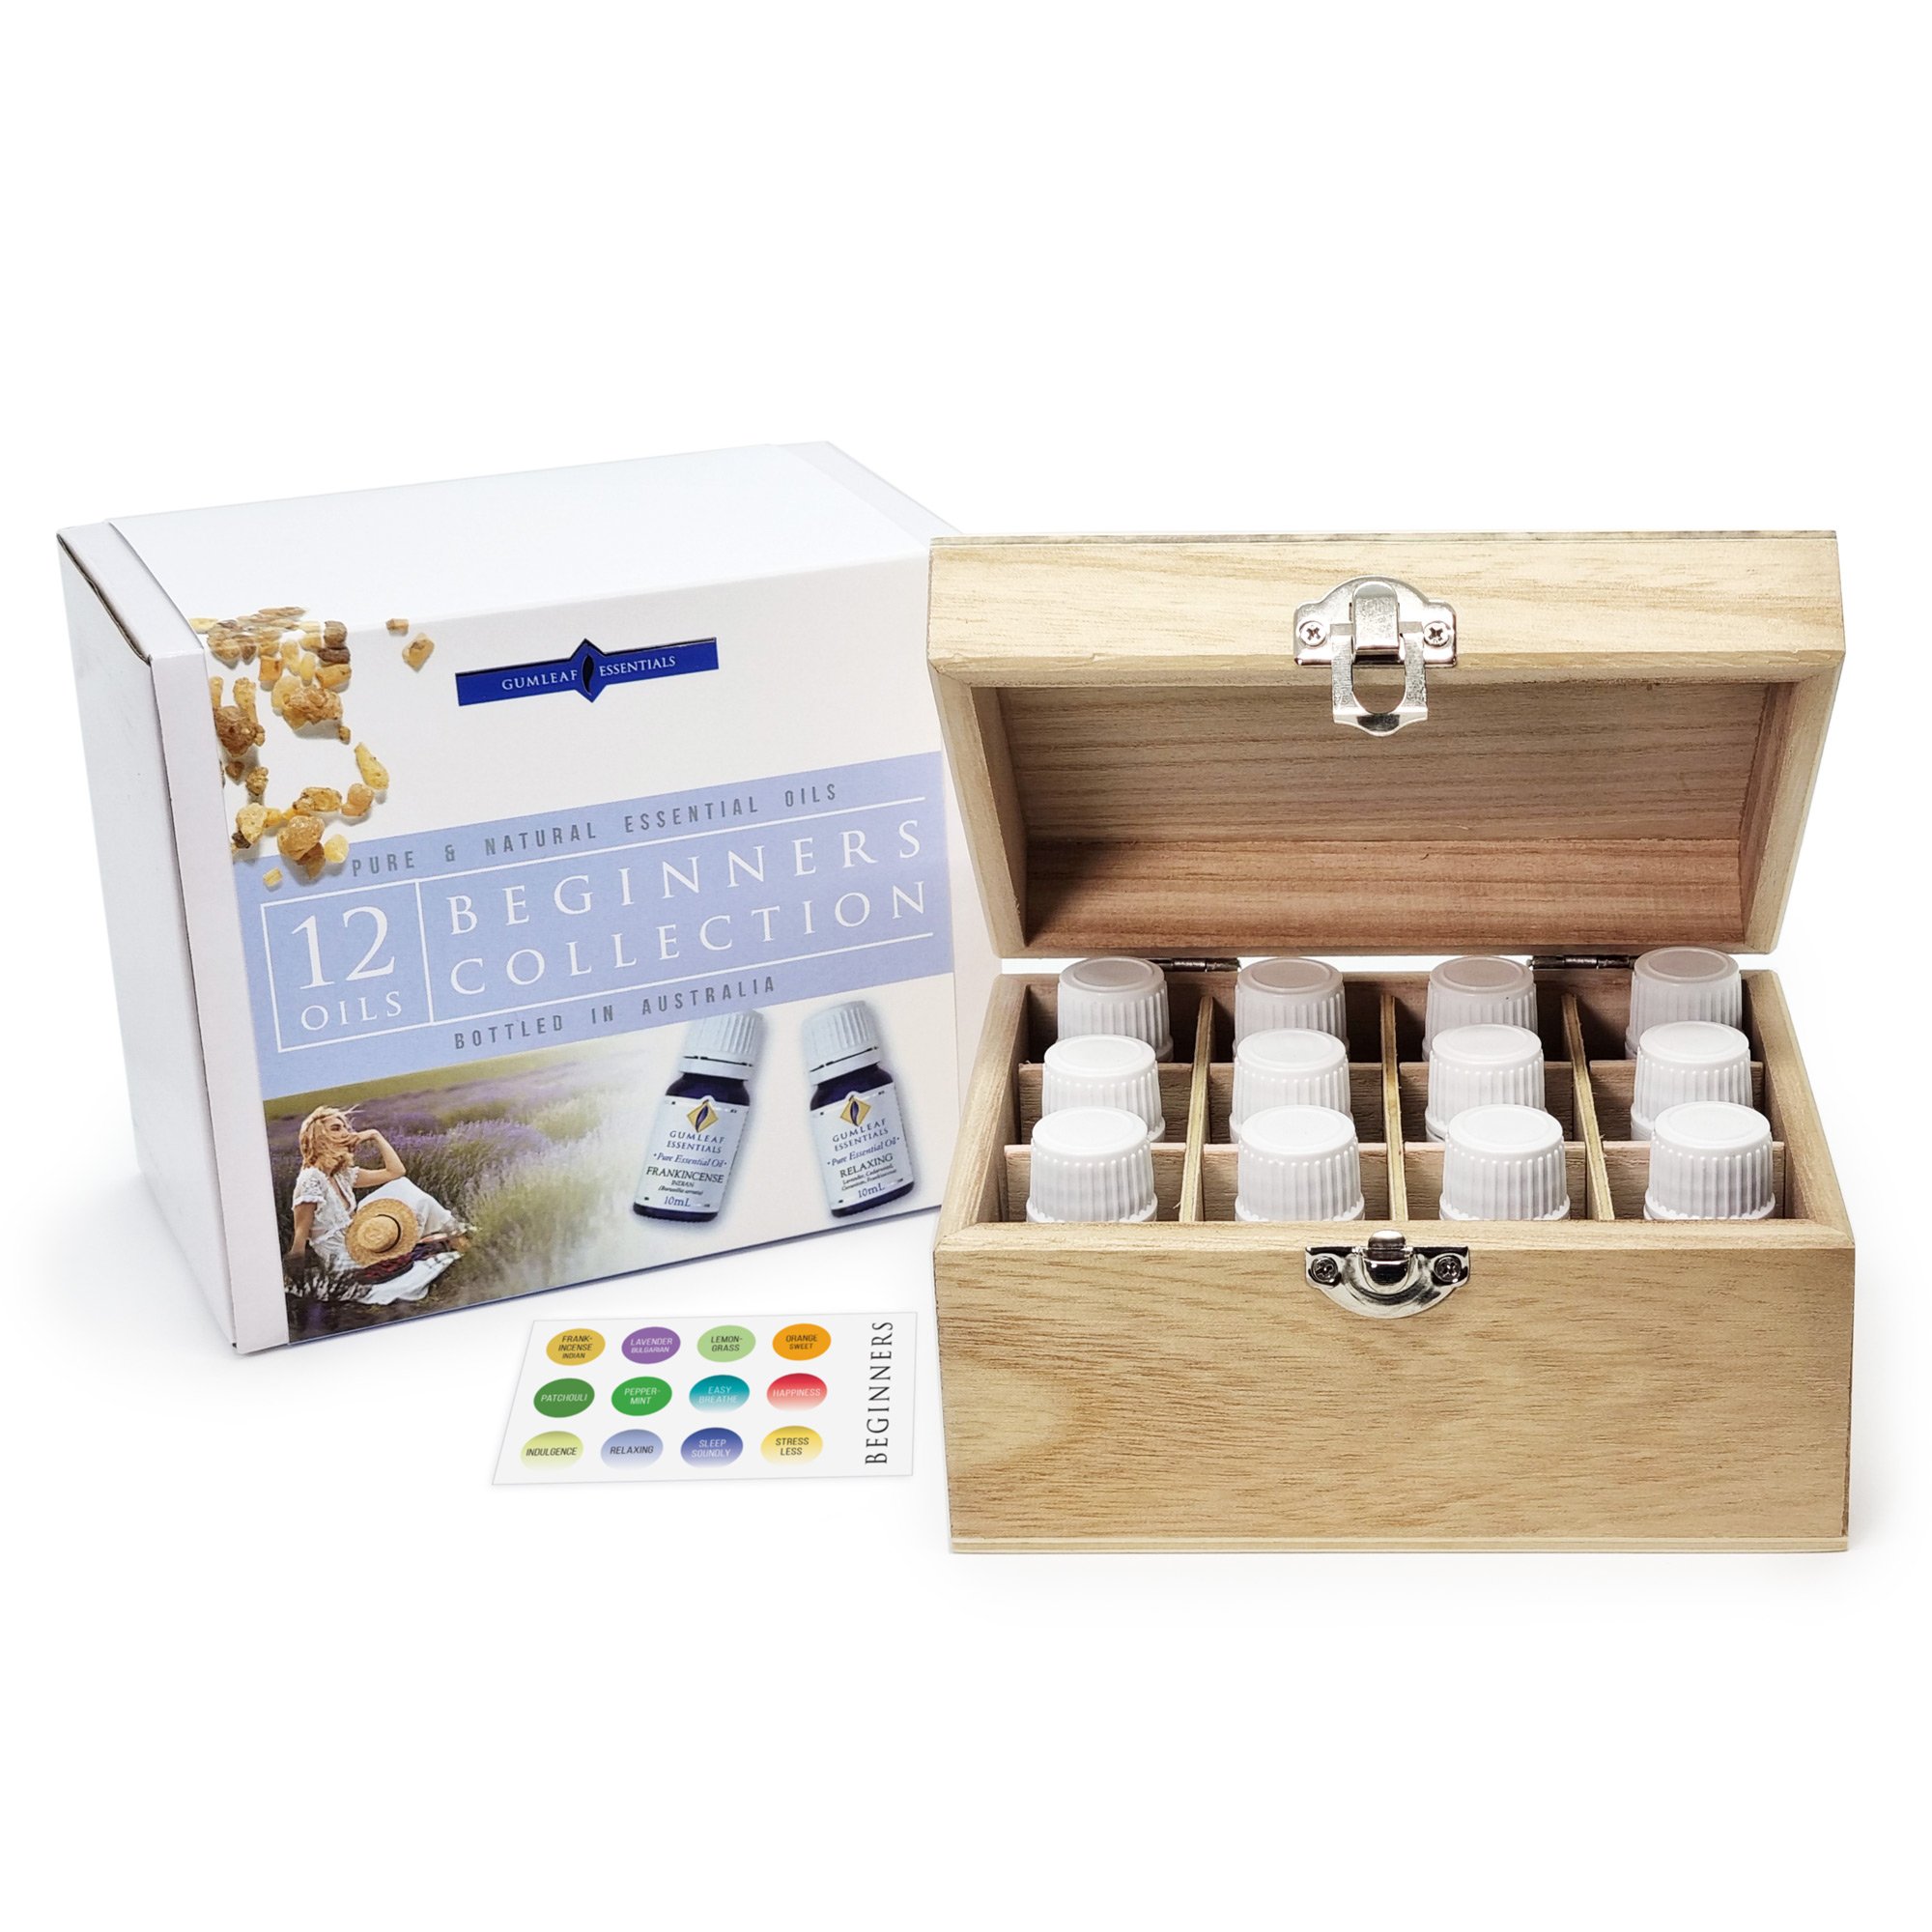 BEGINNERS COLLECTION OIL BOX SET